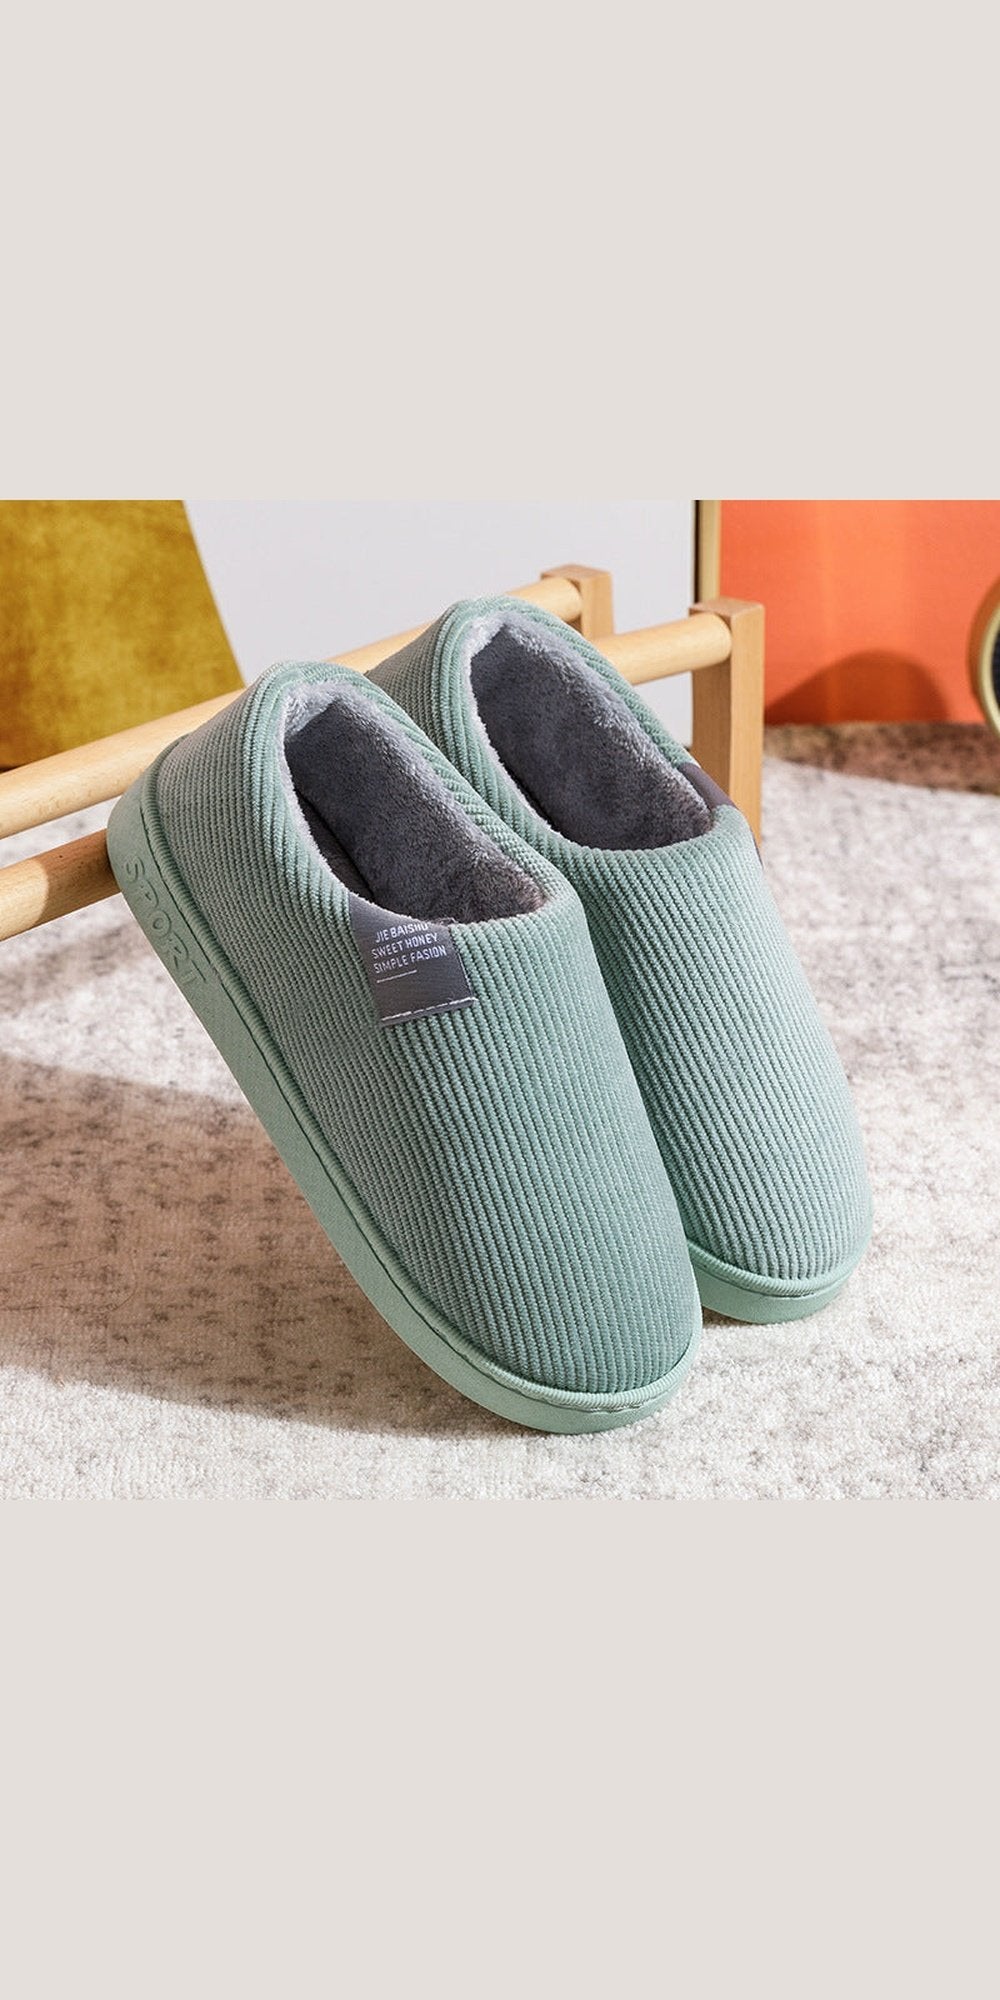 Cozy House Shoes Fuzzy Fluffy Bedroom Slippers Women Winter Warm Shoes